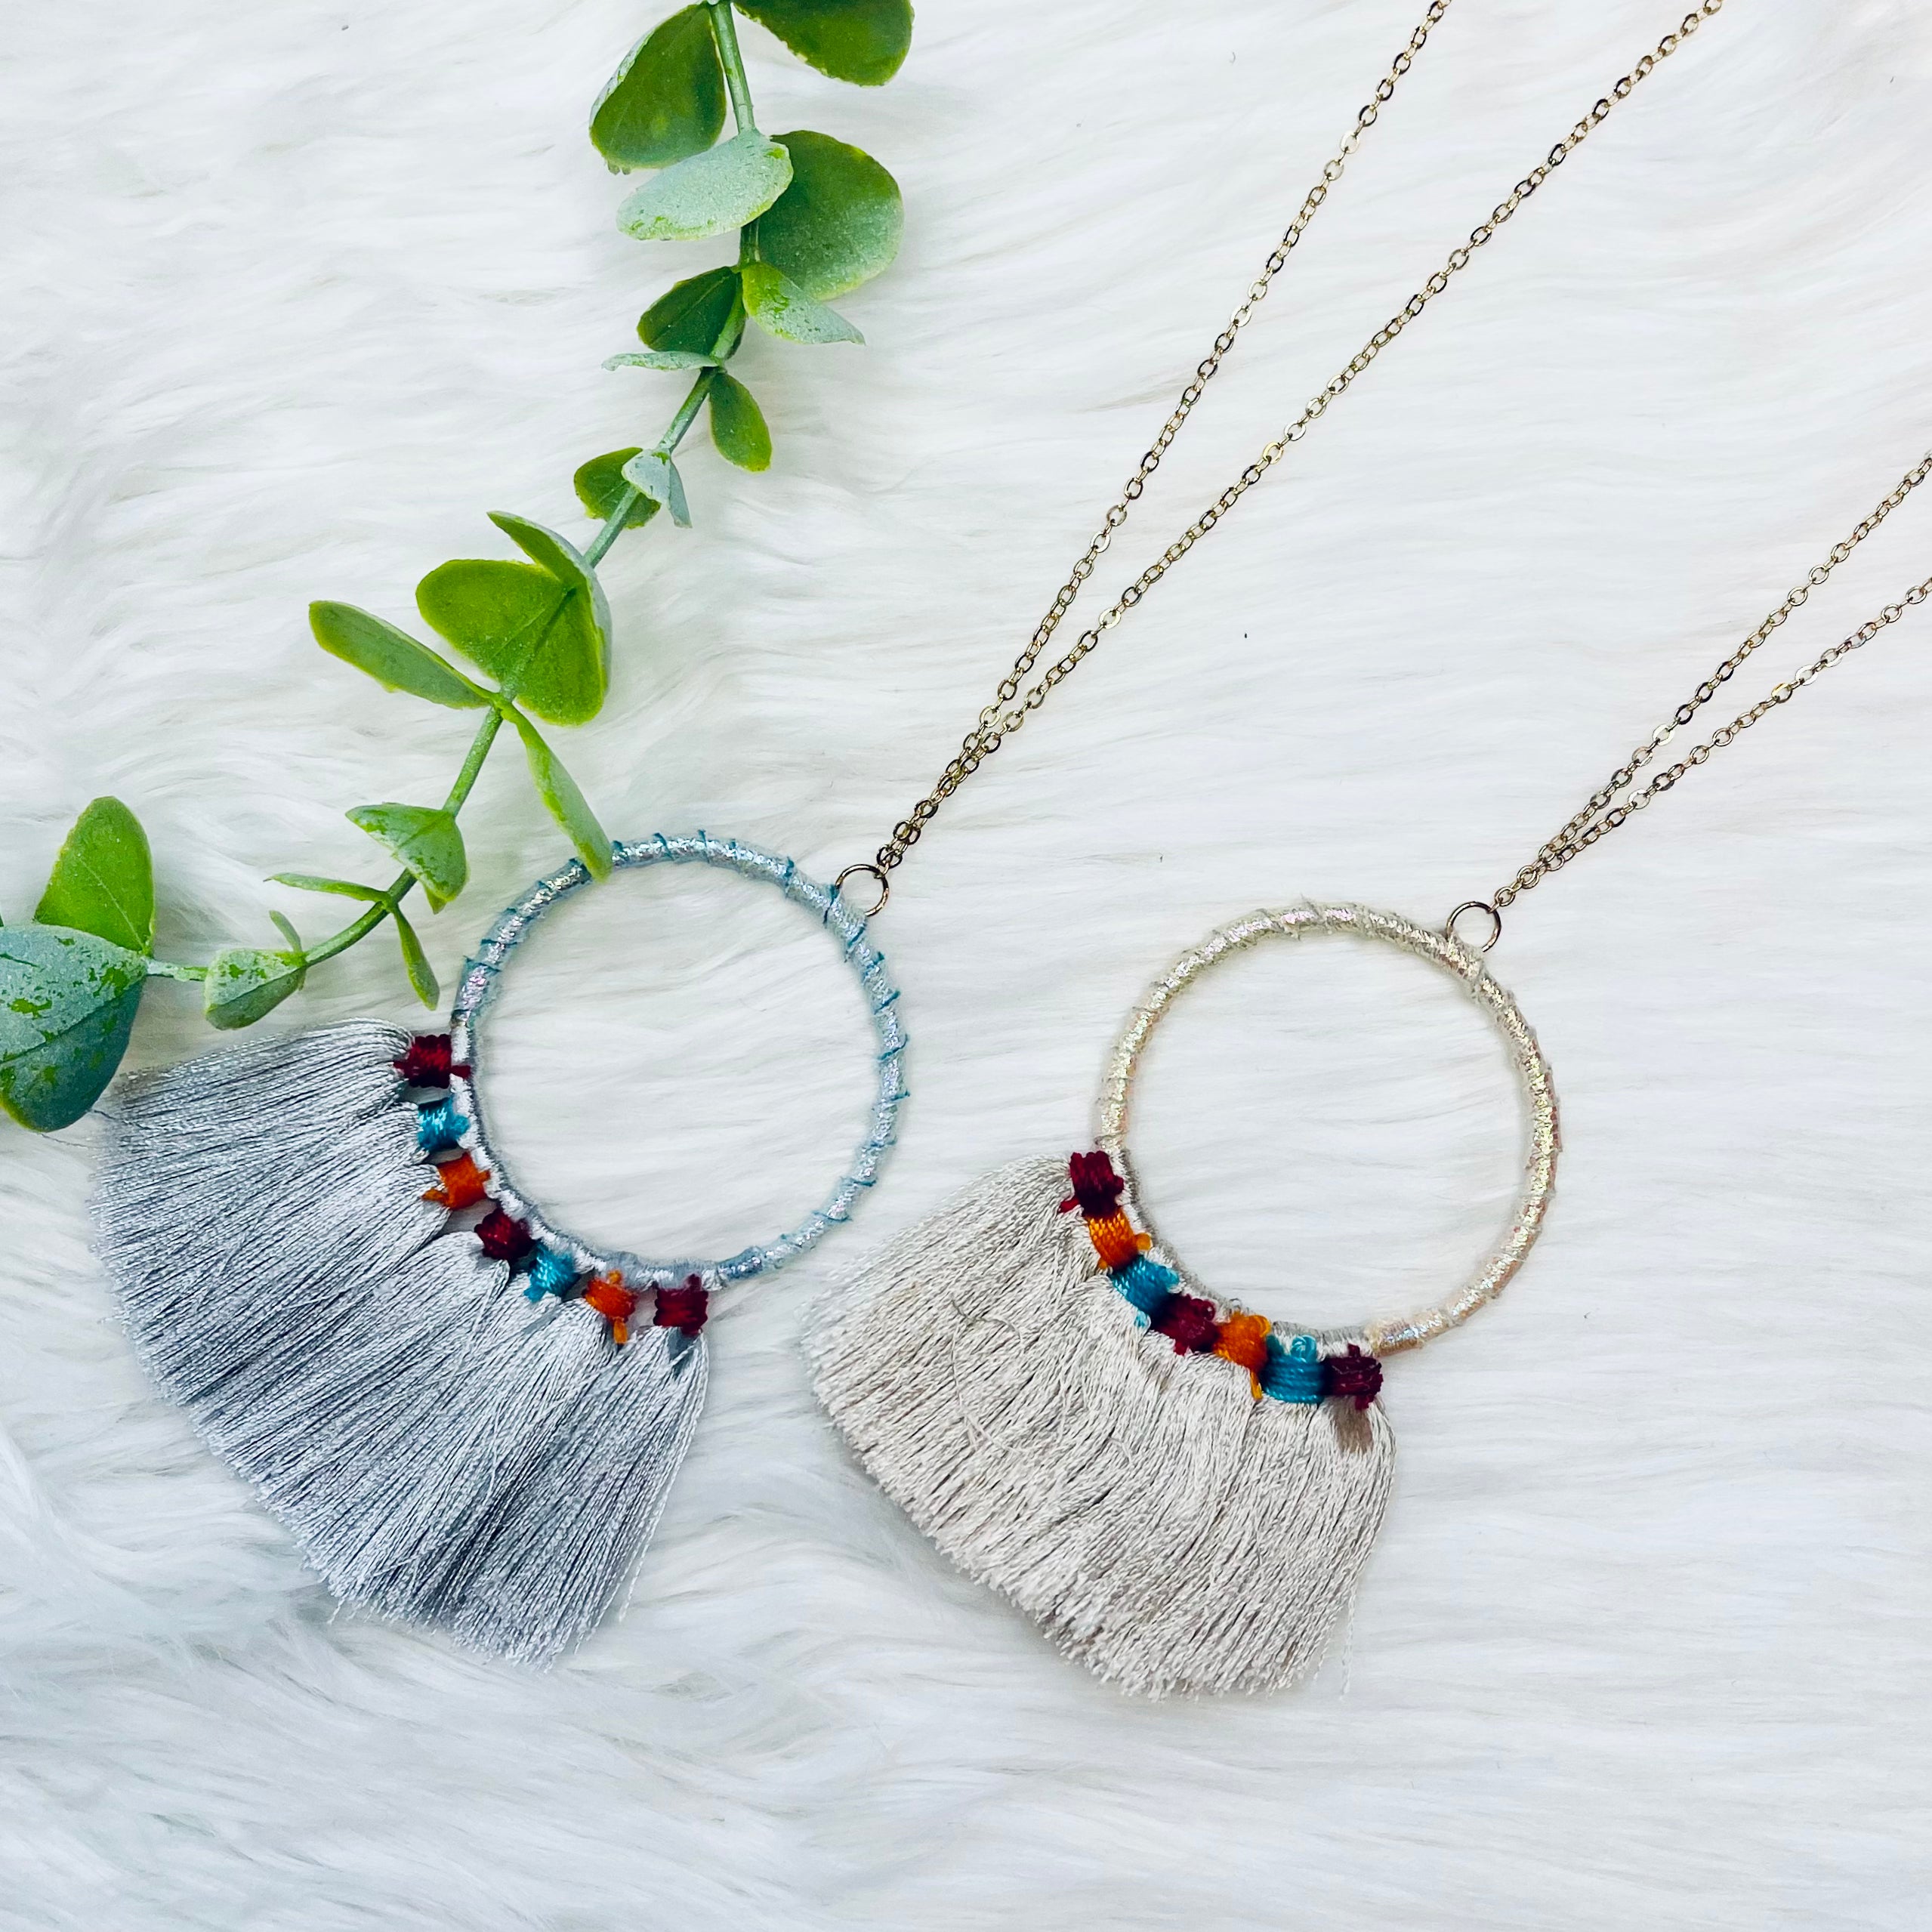 Fabric Wrapped Round Tassel Necklace